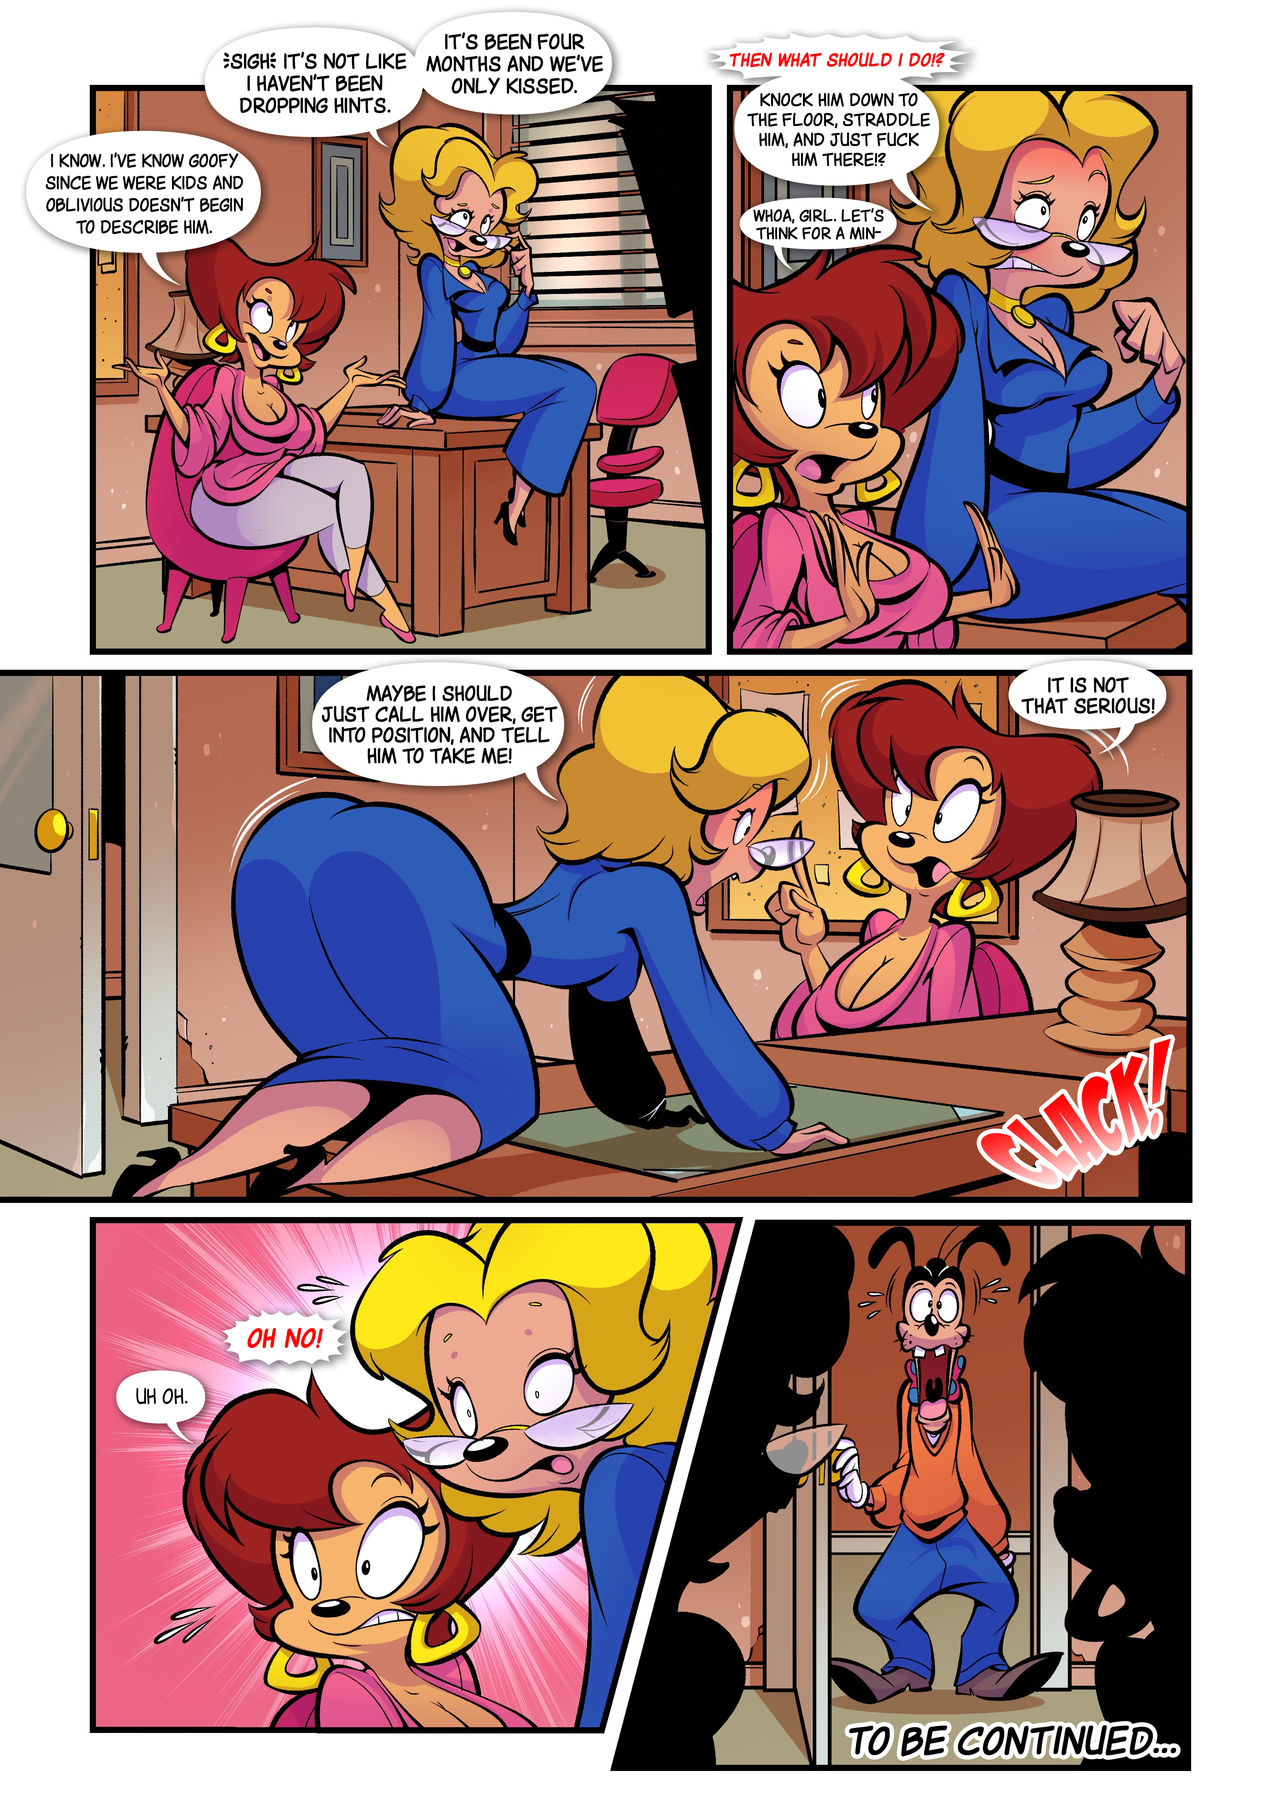 ThaMan - She Goofed - Goof Troop - Ongoing